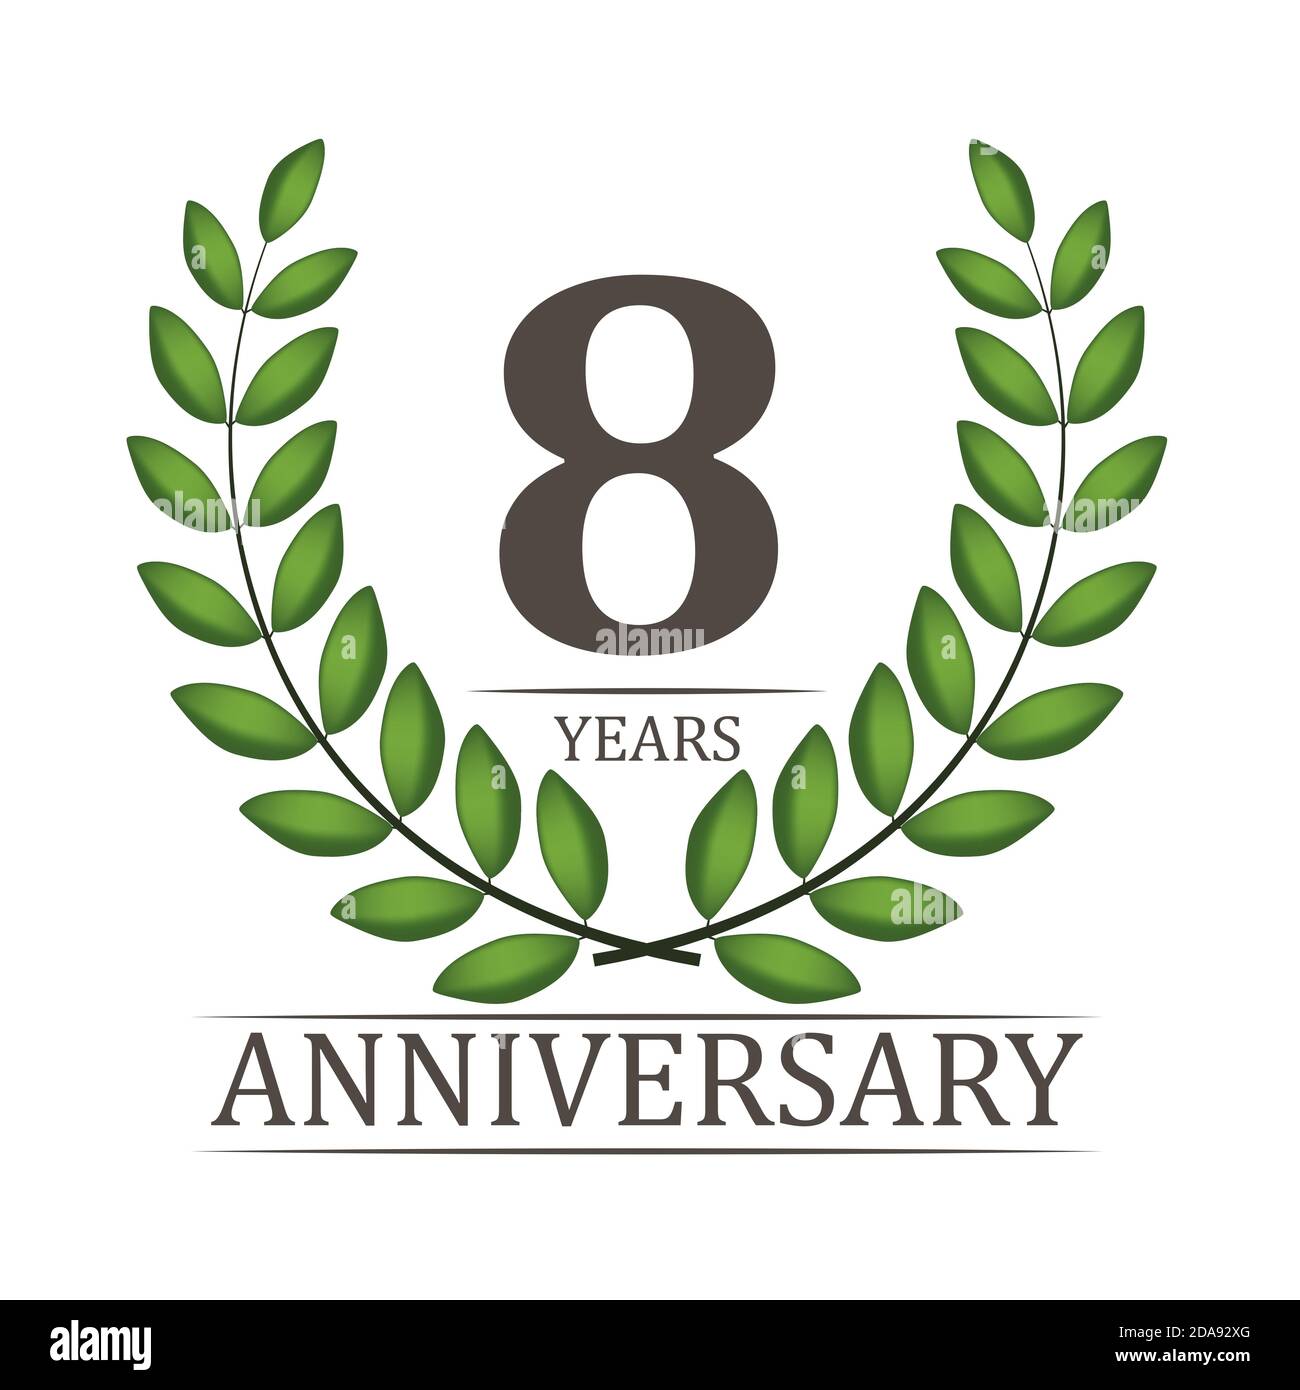 8 Years Anniversary Template with Red Ribbon and Laurel wreath Illustration Stock Photo